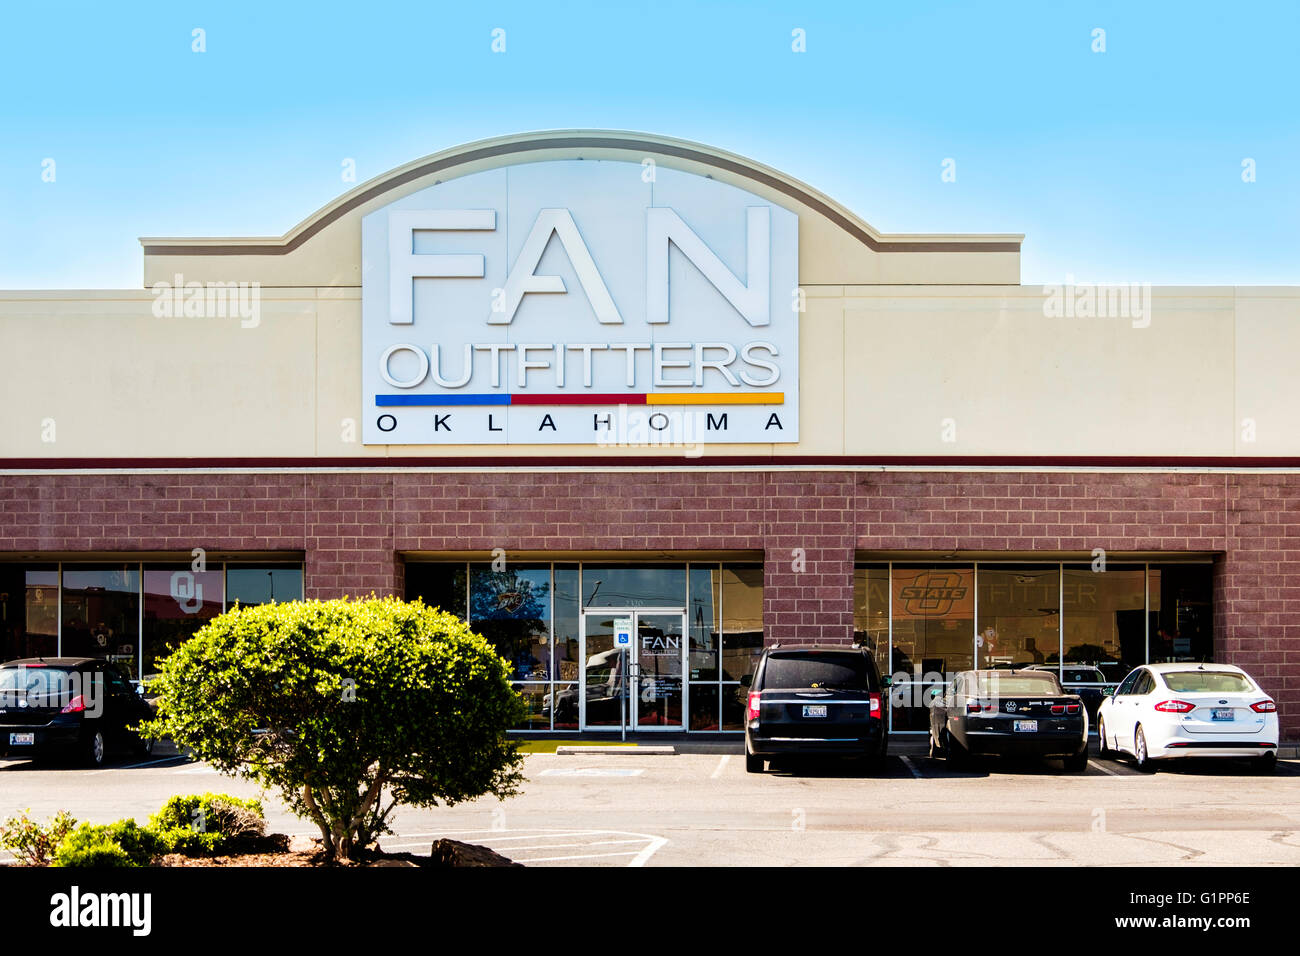 The exterior of Fan Outfitters, a shop selling jerseys and sportswear for the fan. Oklahoma City, Oklahoma, USA. Stock Photo